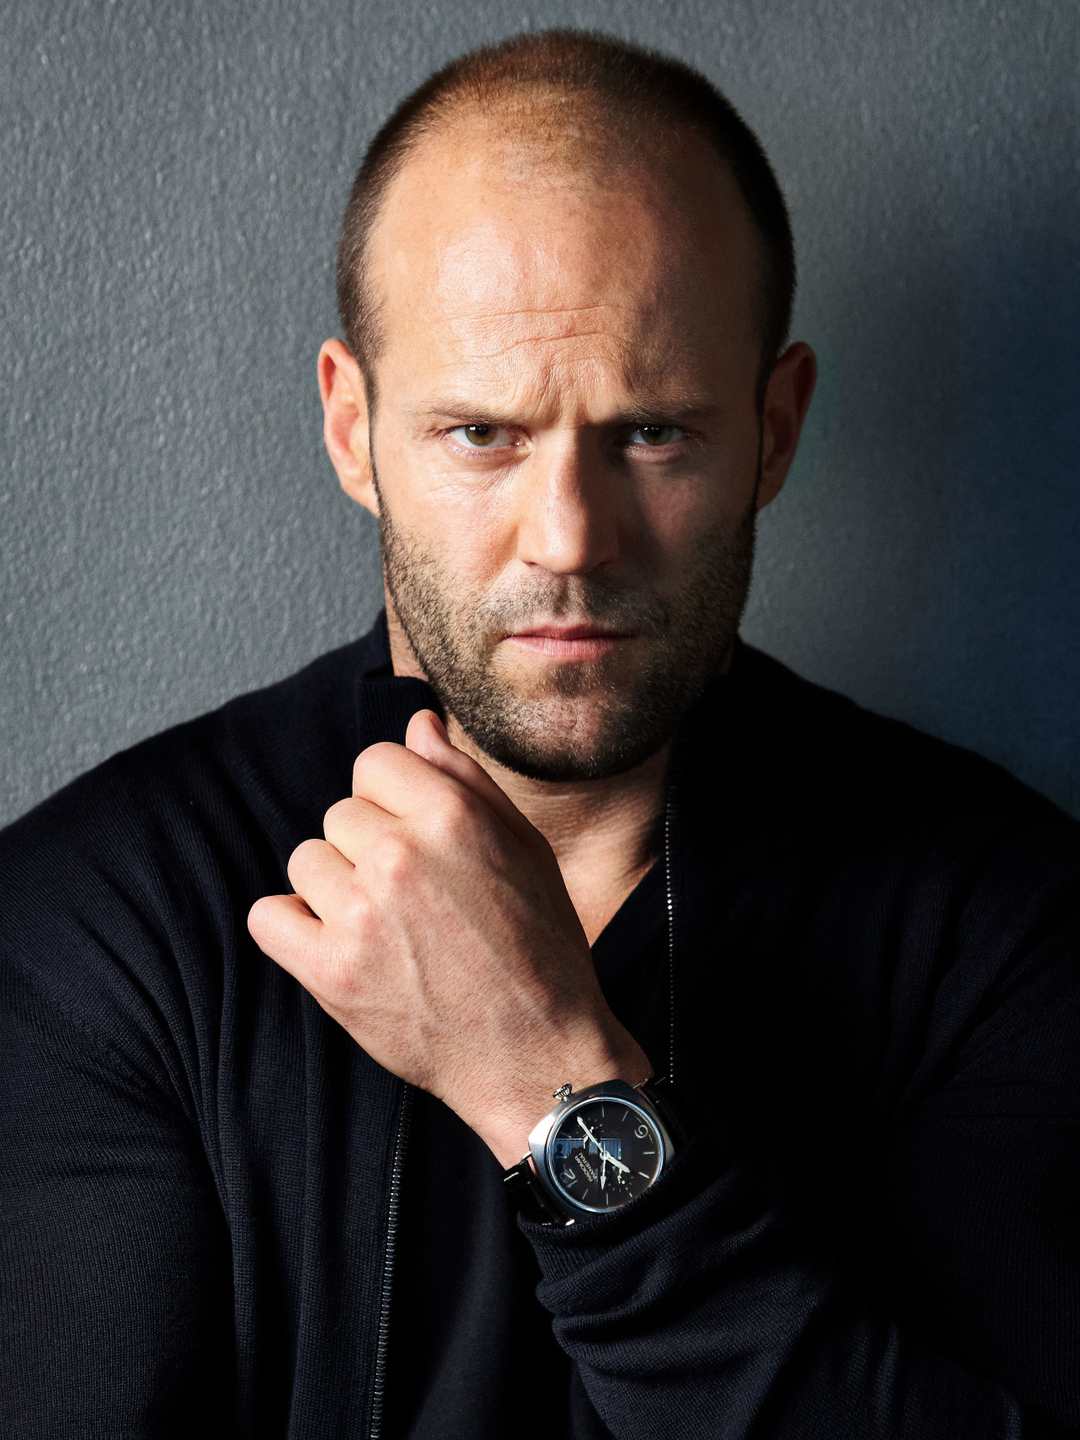 Jason Statham who is his father